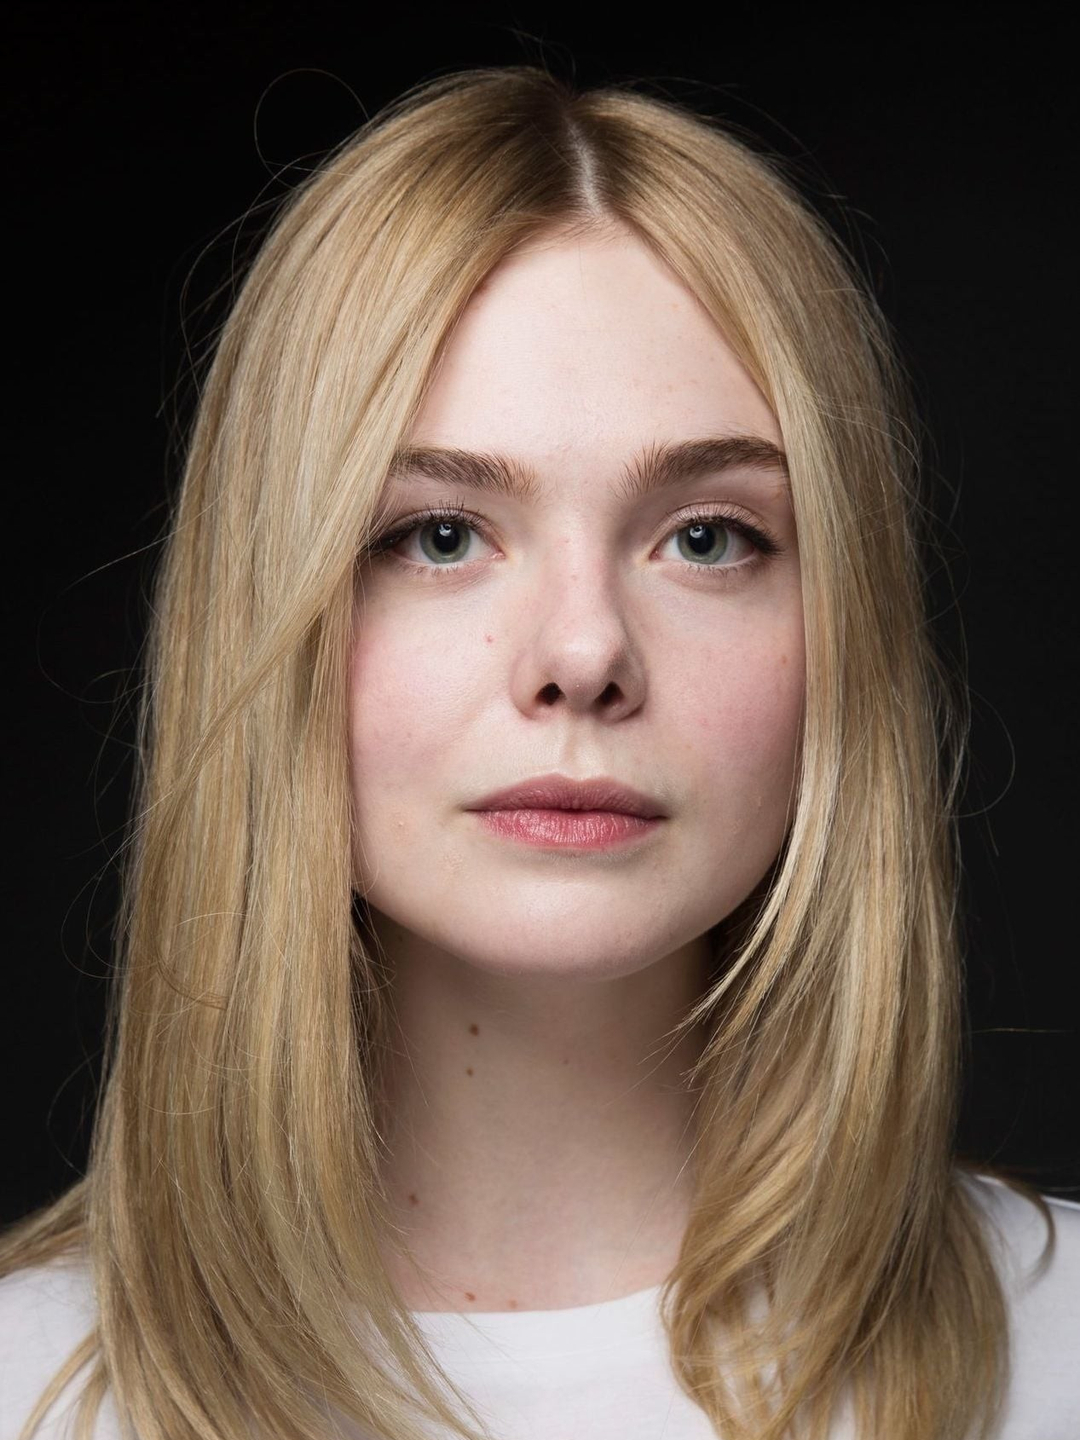 Elle Fanning where did she study